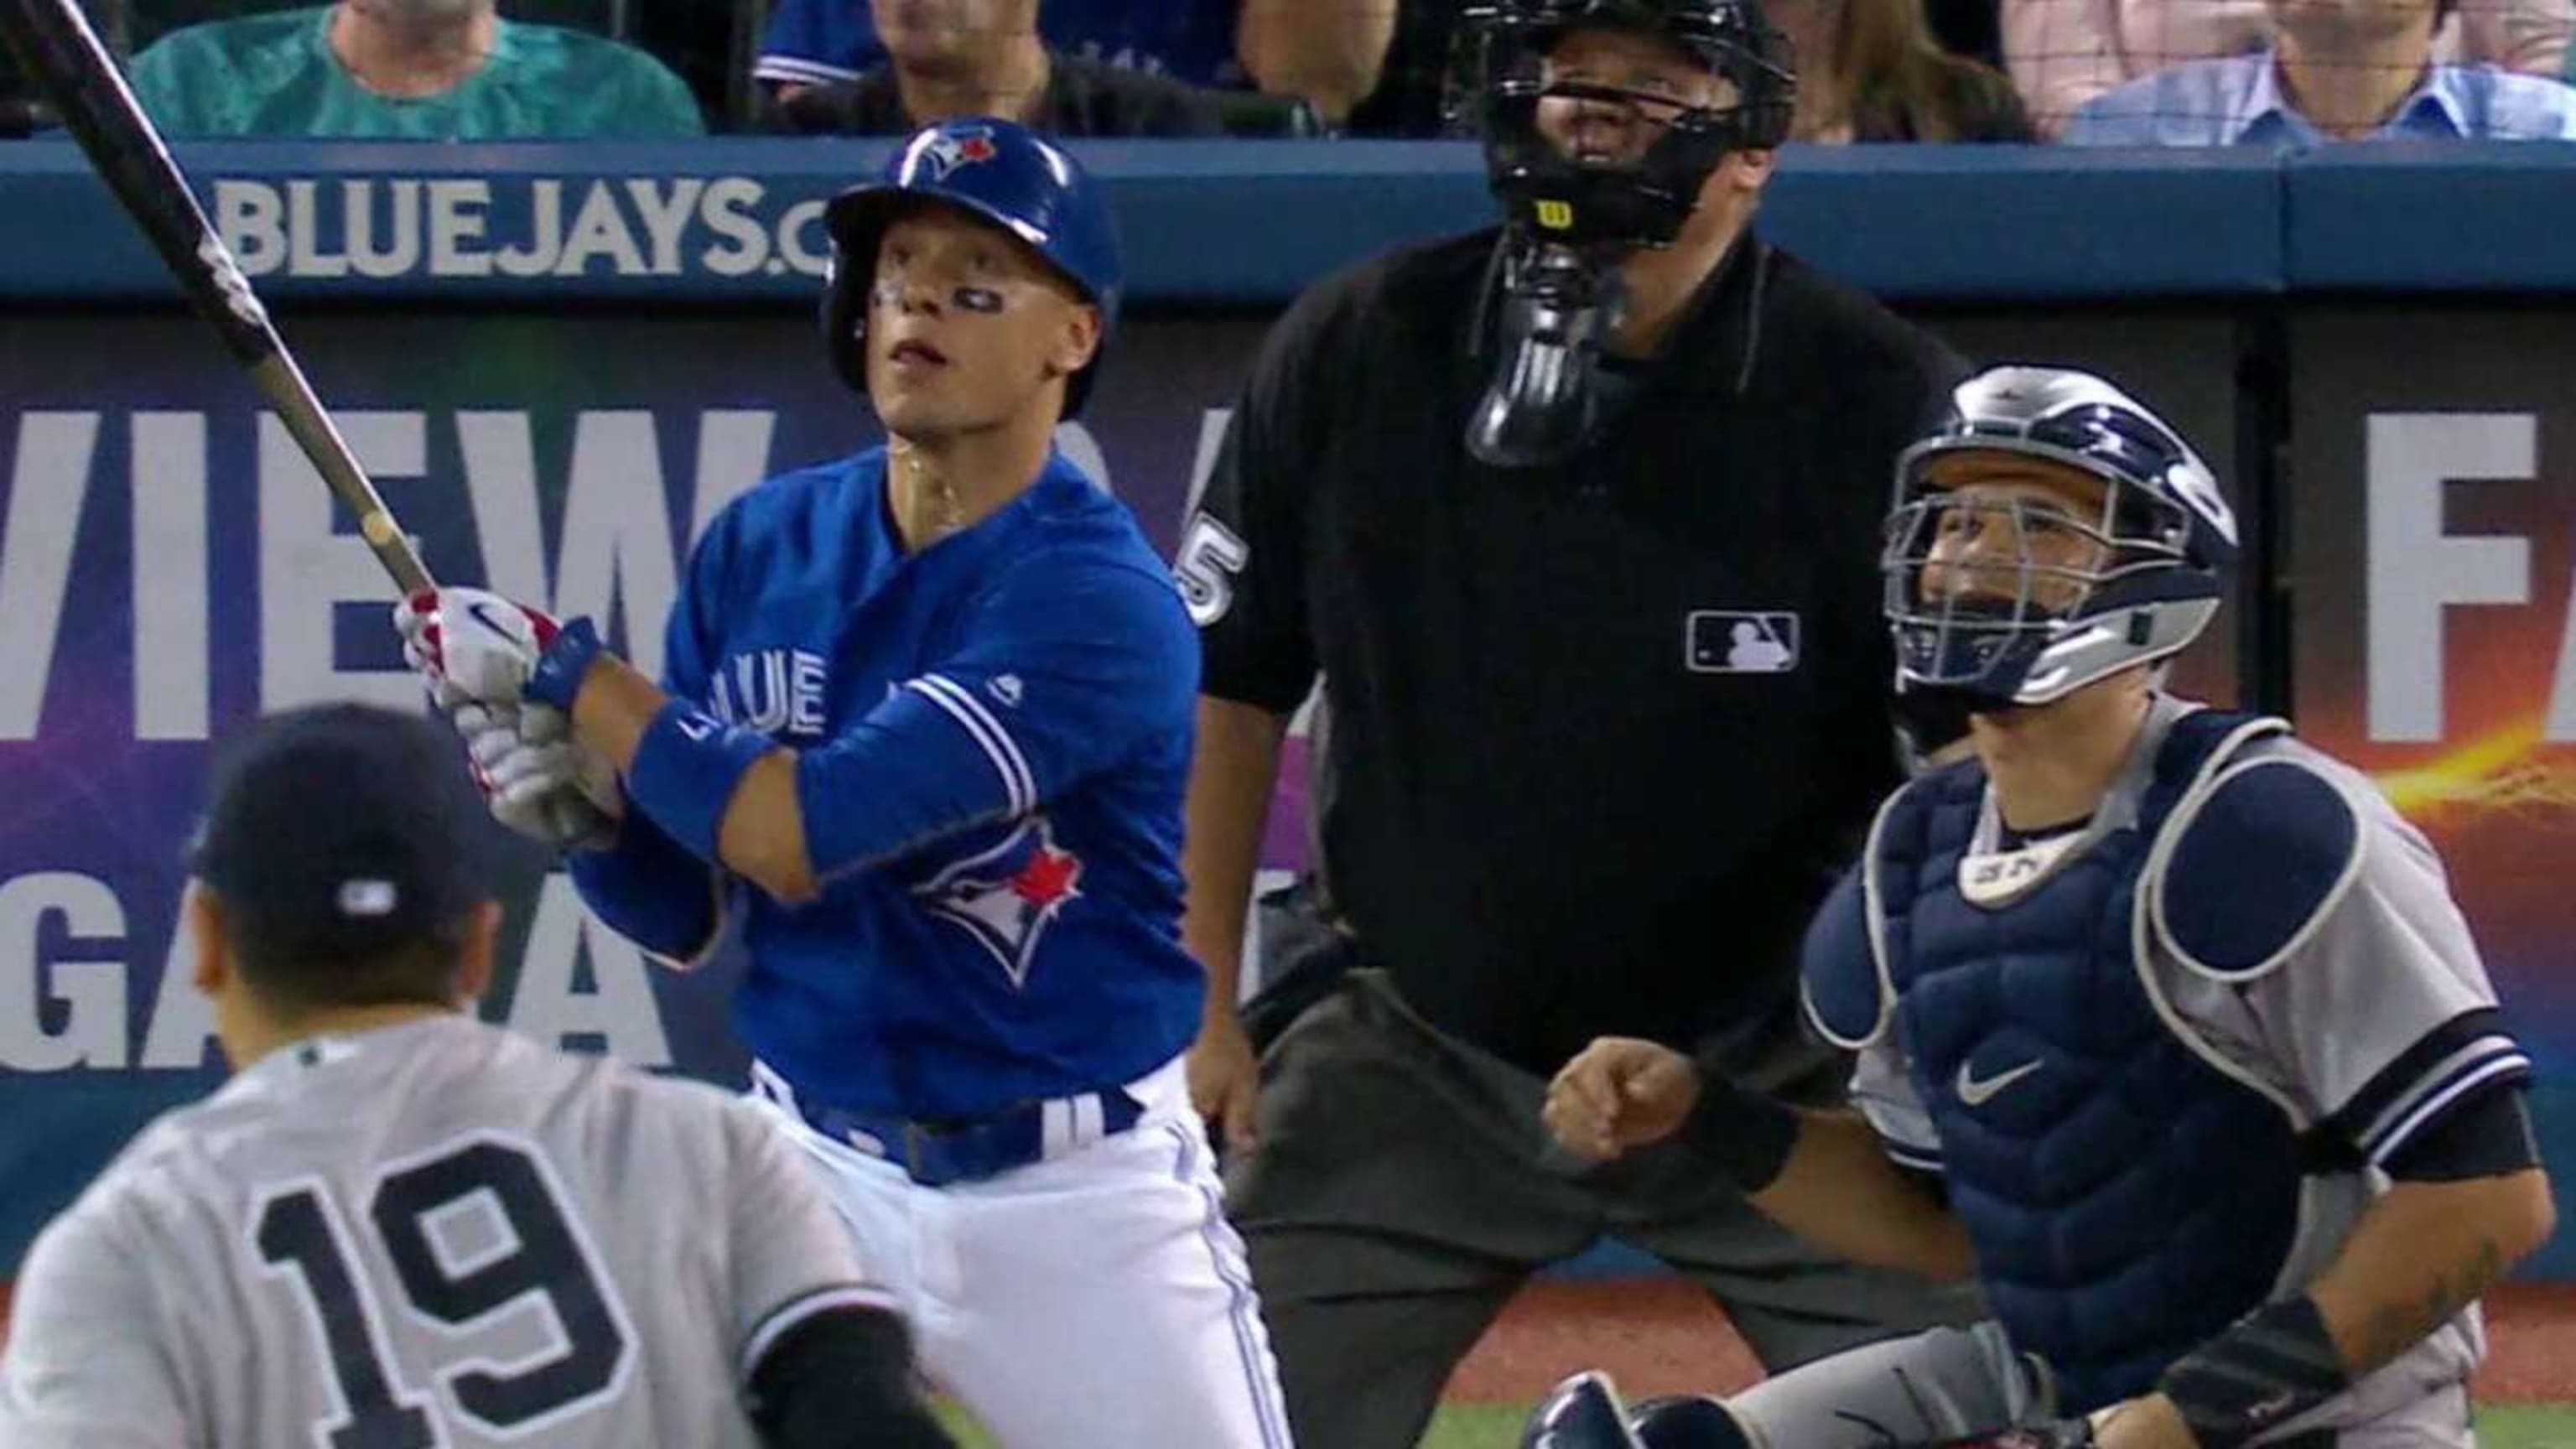 Ryan Goins Called Up to the Show by Blue Jays - Dallas Baptist